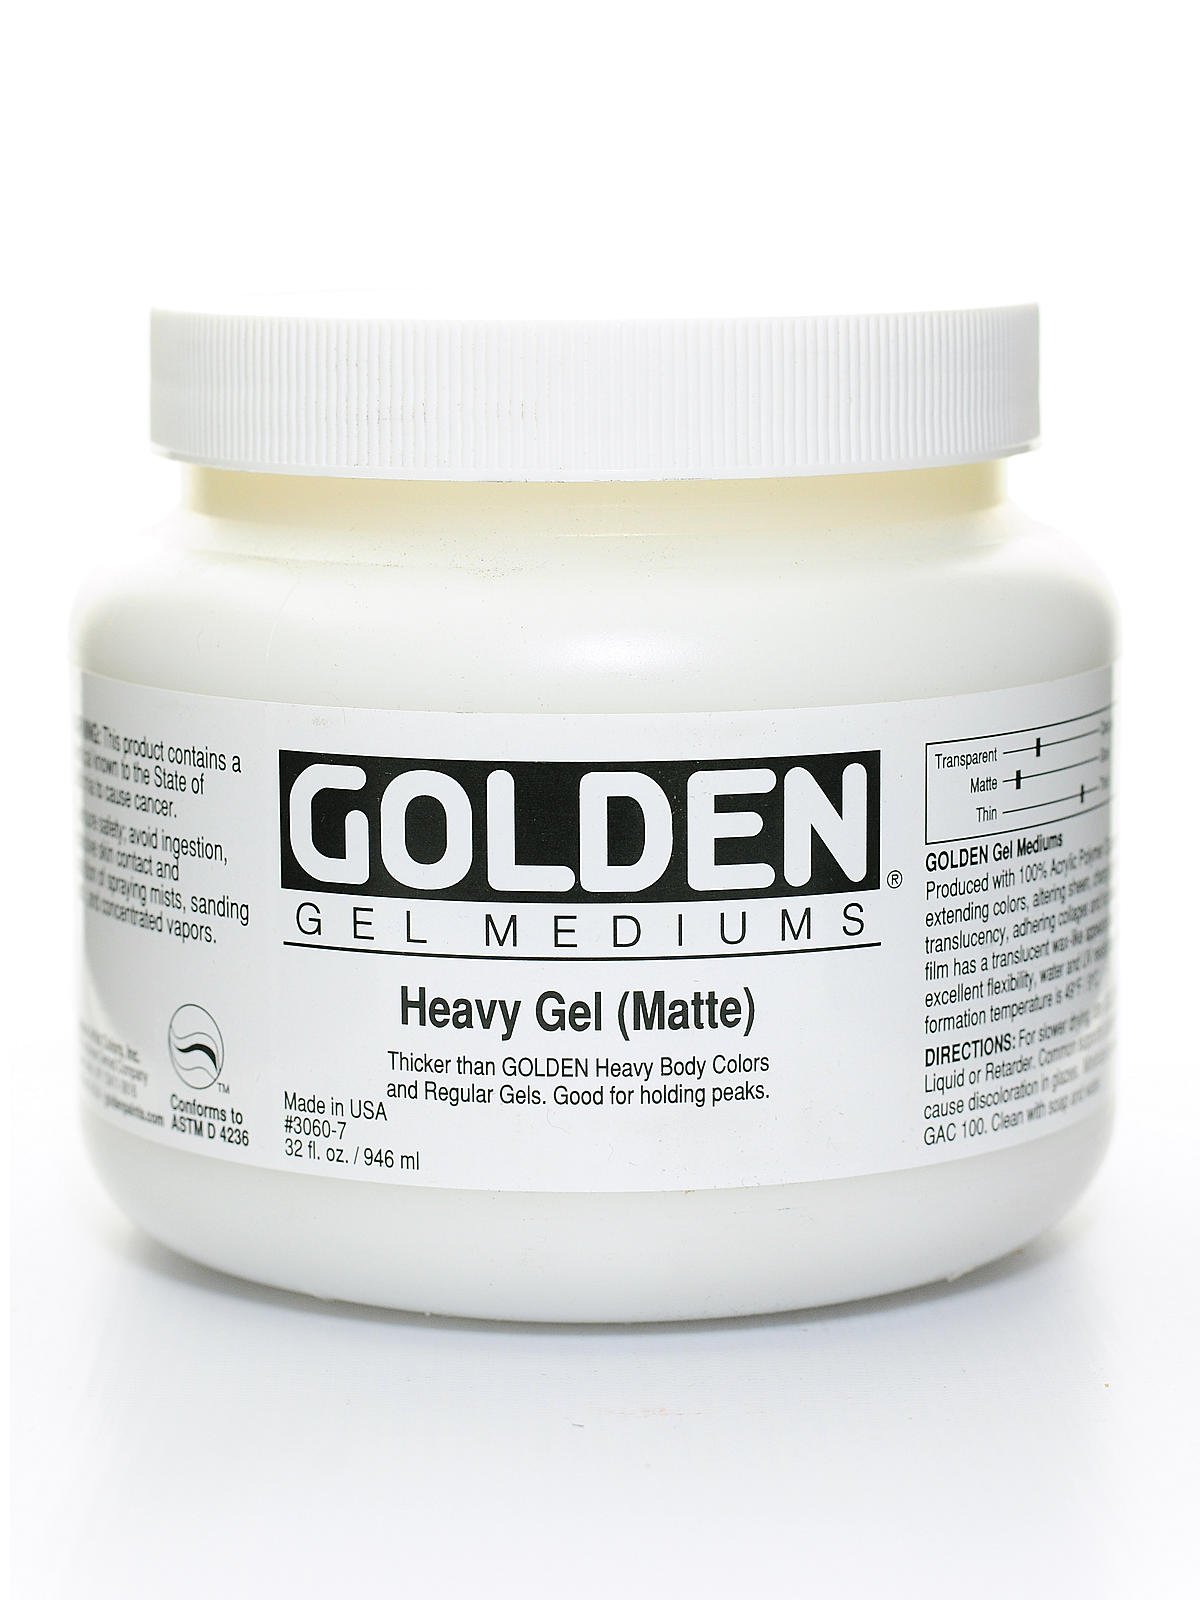 GOLDEN Gel Medium and Fluid Acrylics Featured in Spring Promotion